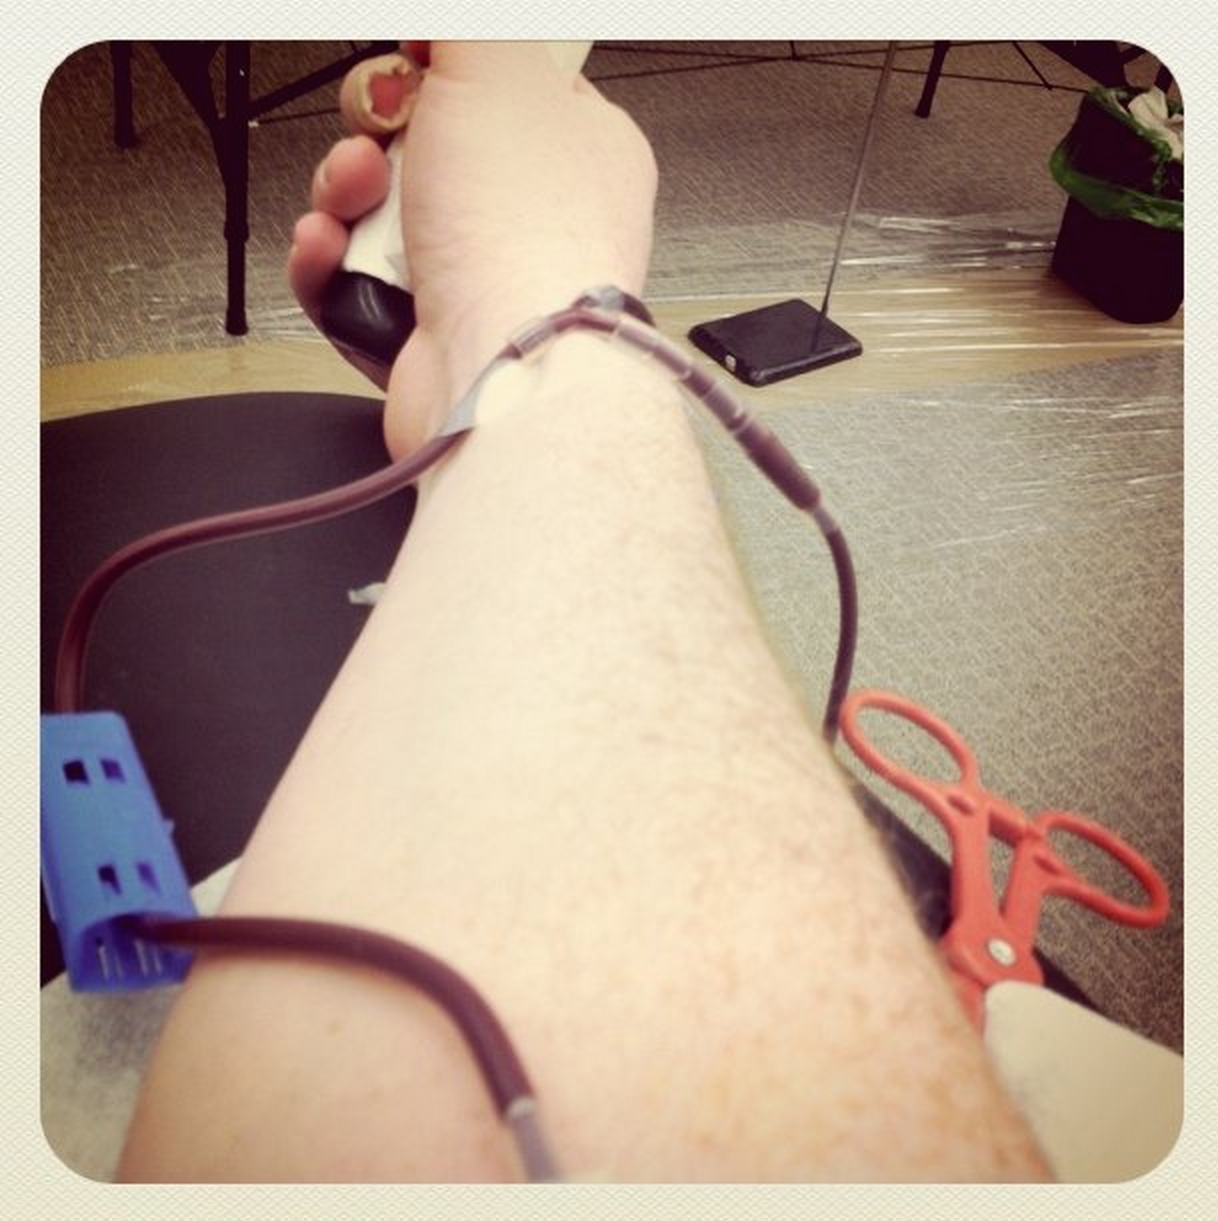 FDA Ends Across-The-Board Ban On Blood Donations From Gay, Bisexual Men